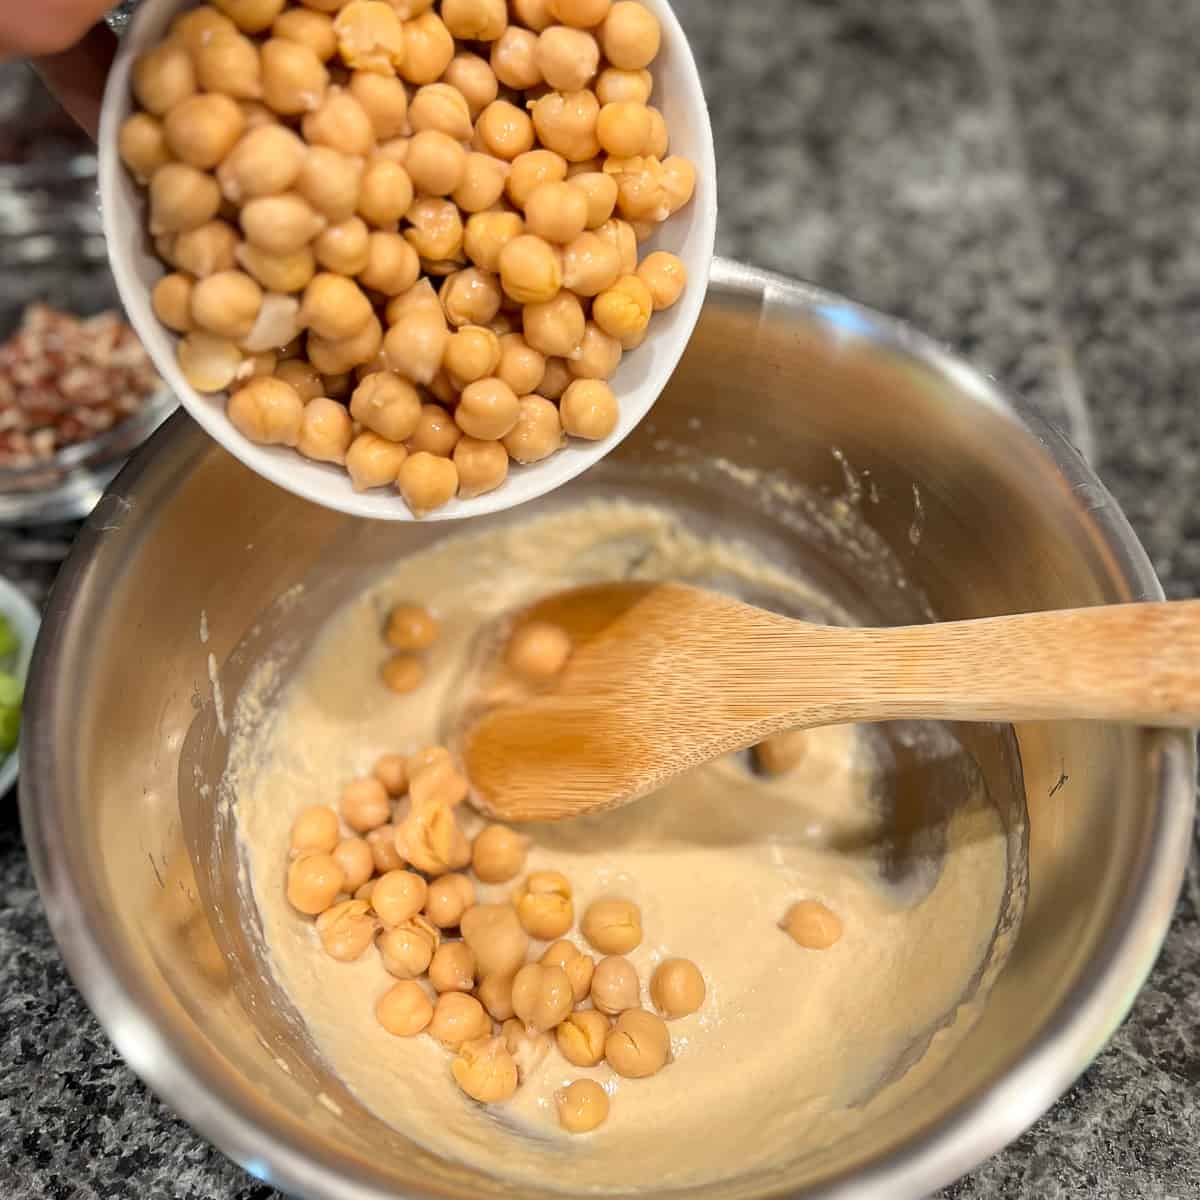 chickpeas being added to the sauce mixture in the stainless mixing bowl